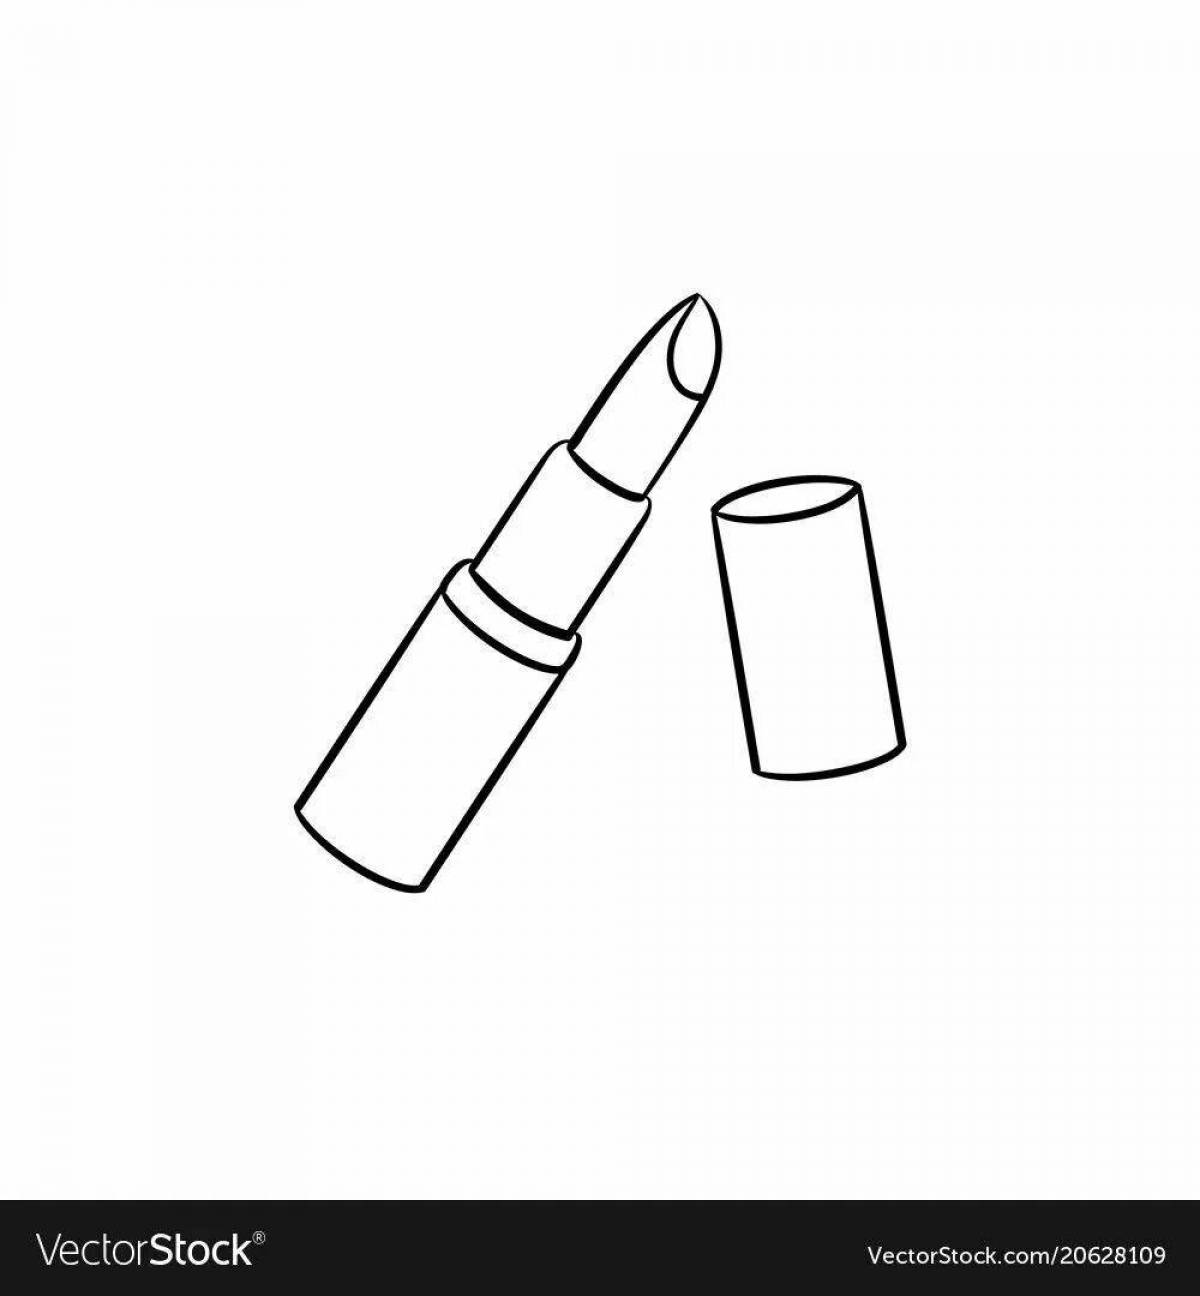 Outstanding lipstick coloring page for kids